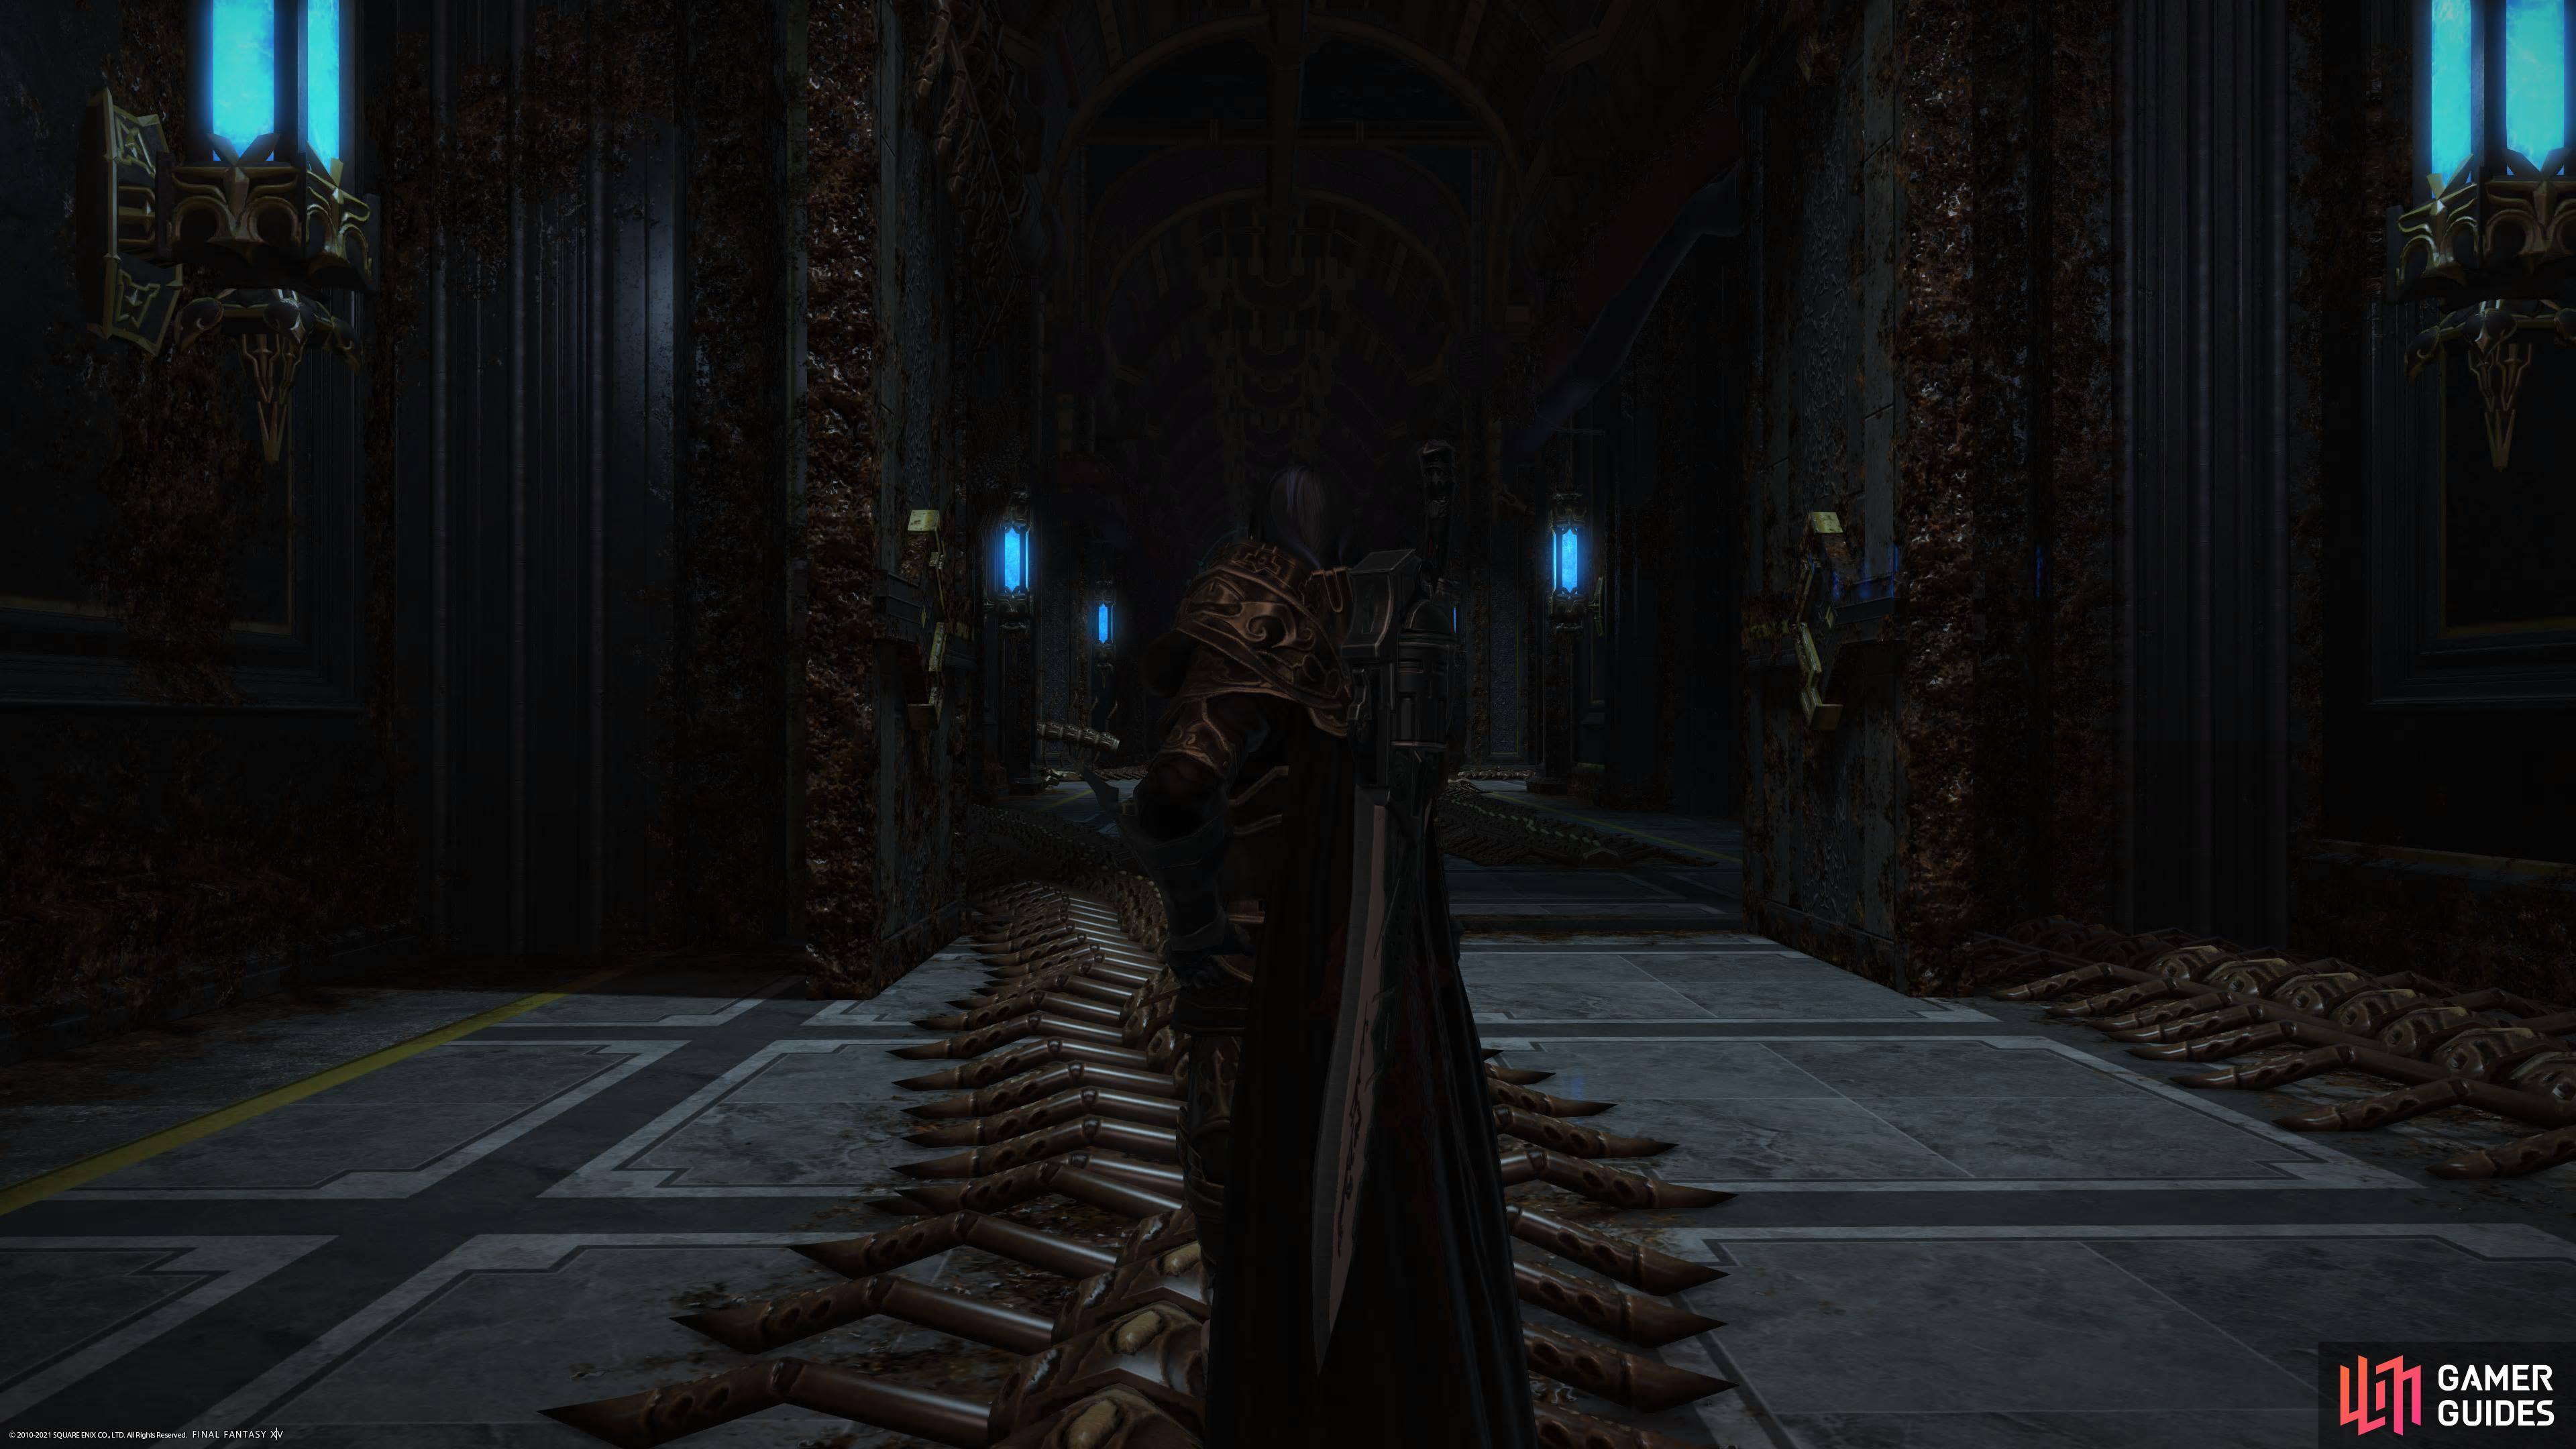 The Tower of Babil is the second dungeon in Endwalker at Level 83.